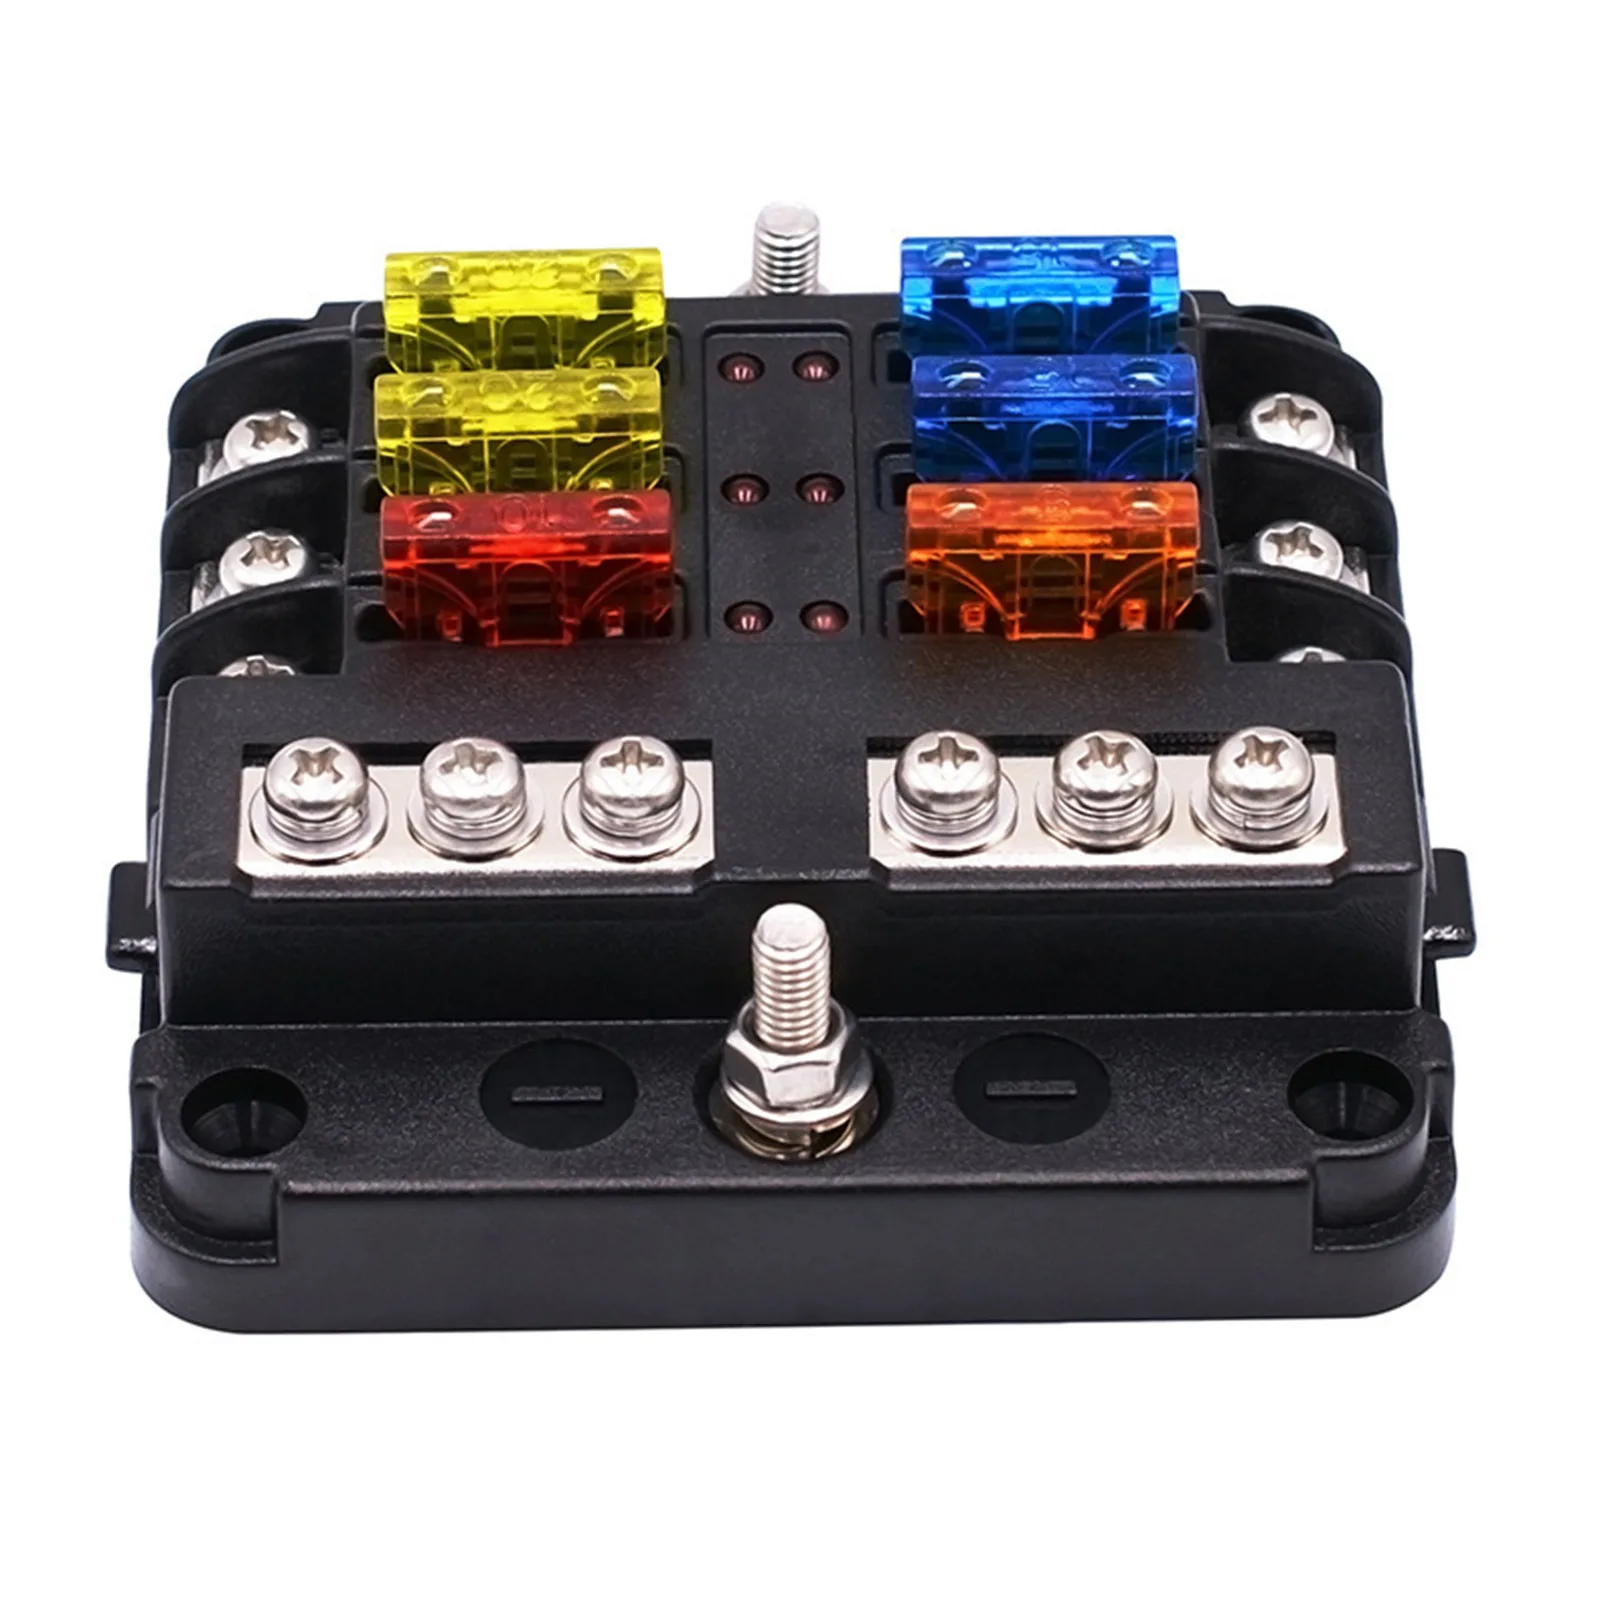 

6-Way Waterproof Fuse Block,with LED Indicator 12 Circuits with Negative Marine Fuse Box for Dc 12/24V Car Boat RV Truck